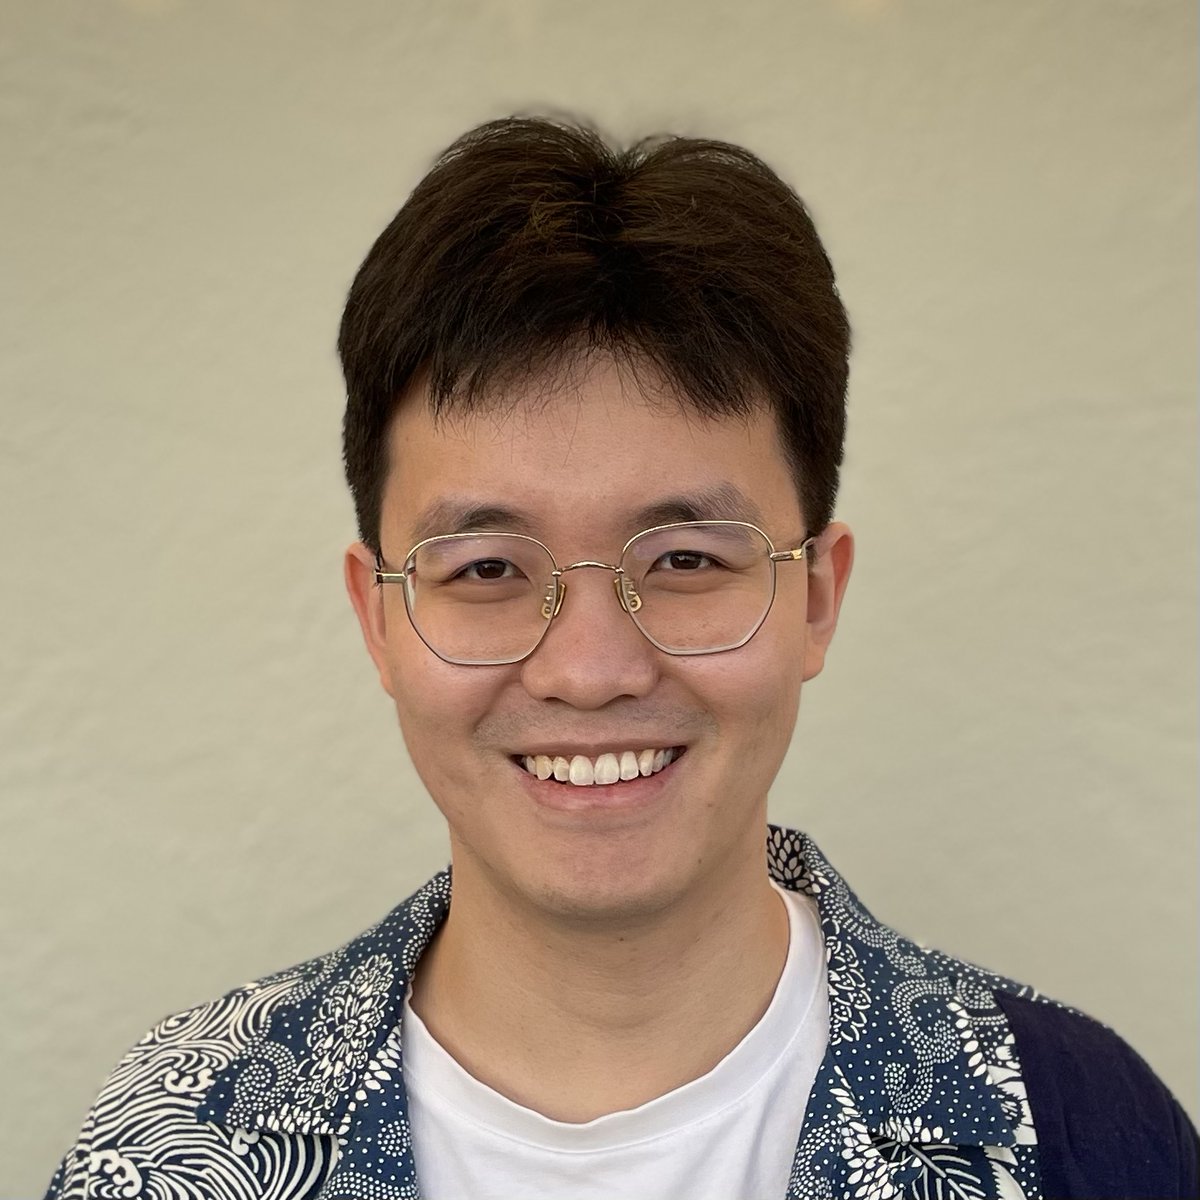 🎉Congrats to Ph.D. student @Songwei_Ge, who recently received the renowned @nvidia Graduate Fellowship. His work aims to revolutionize how people of all skill levels engage with the digital arts. Read more: go.umd.edu/NVIDIA